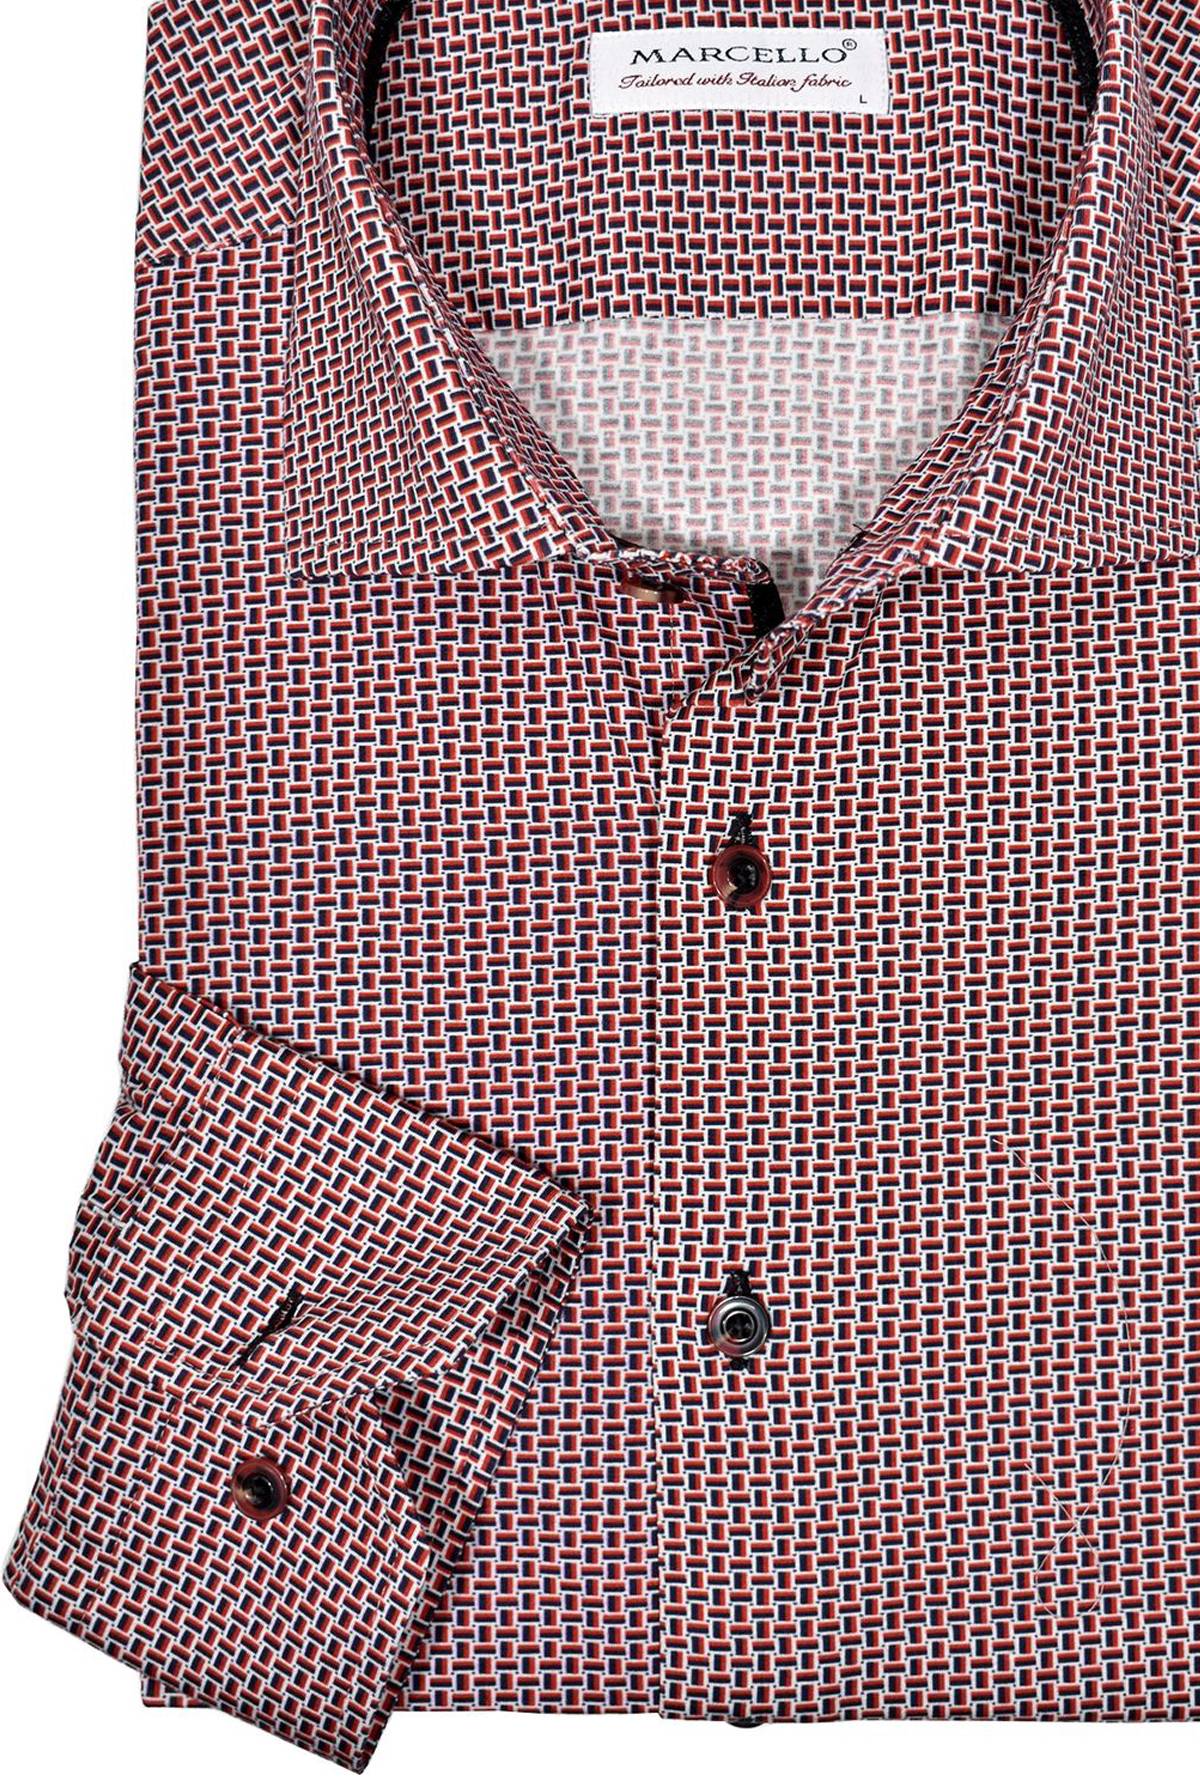 A neat pattern in a chain link design with rich red, ruby and black colors for a sophisticated look to pair with a dark jean or a dress pant. The pattern and coloration yield a rich, elegant look to feature a distinguished image.  Featuring a soft cotton fabric, matched buttons, contrast stitch detailing.  Classic shaped fit.